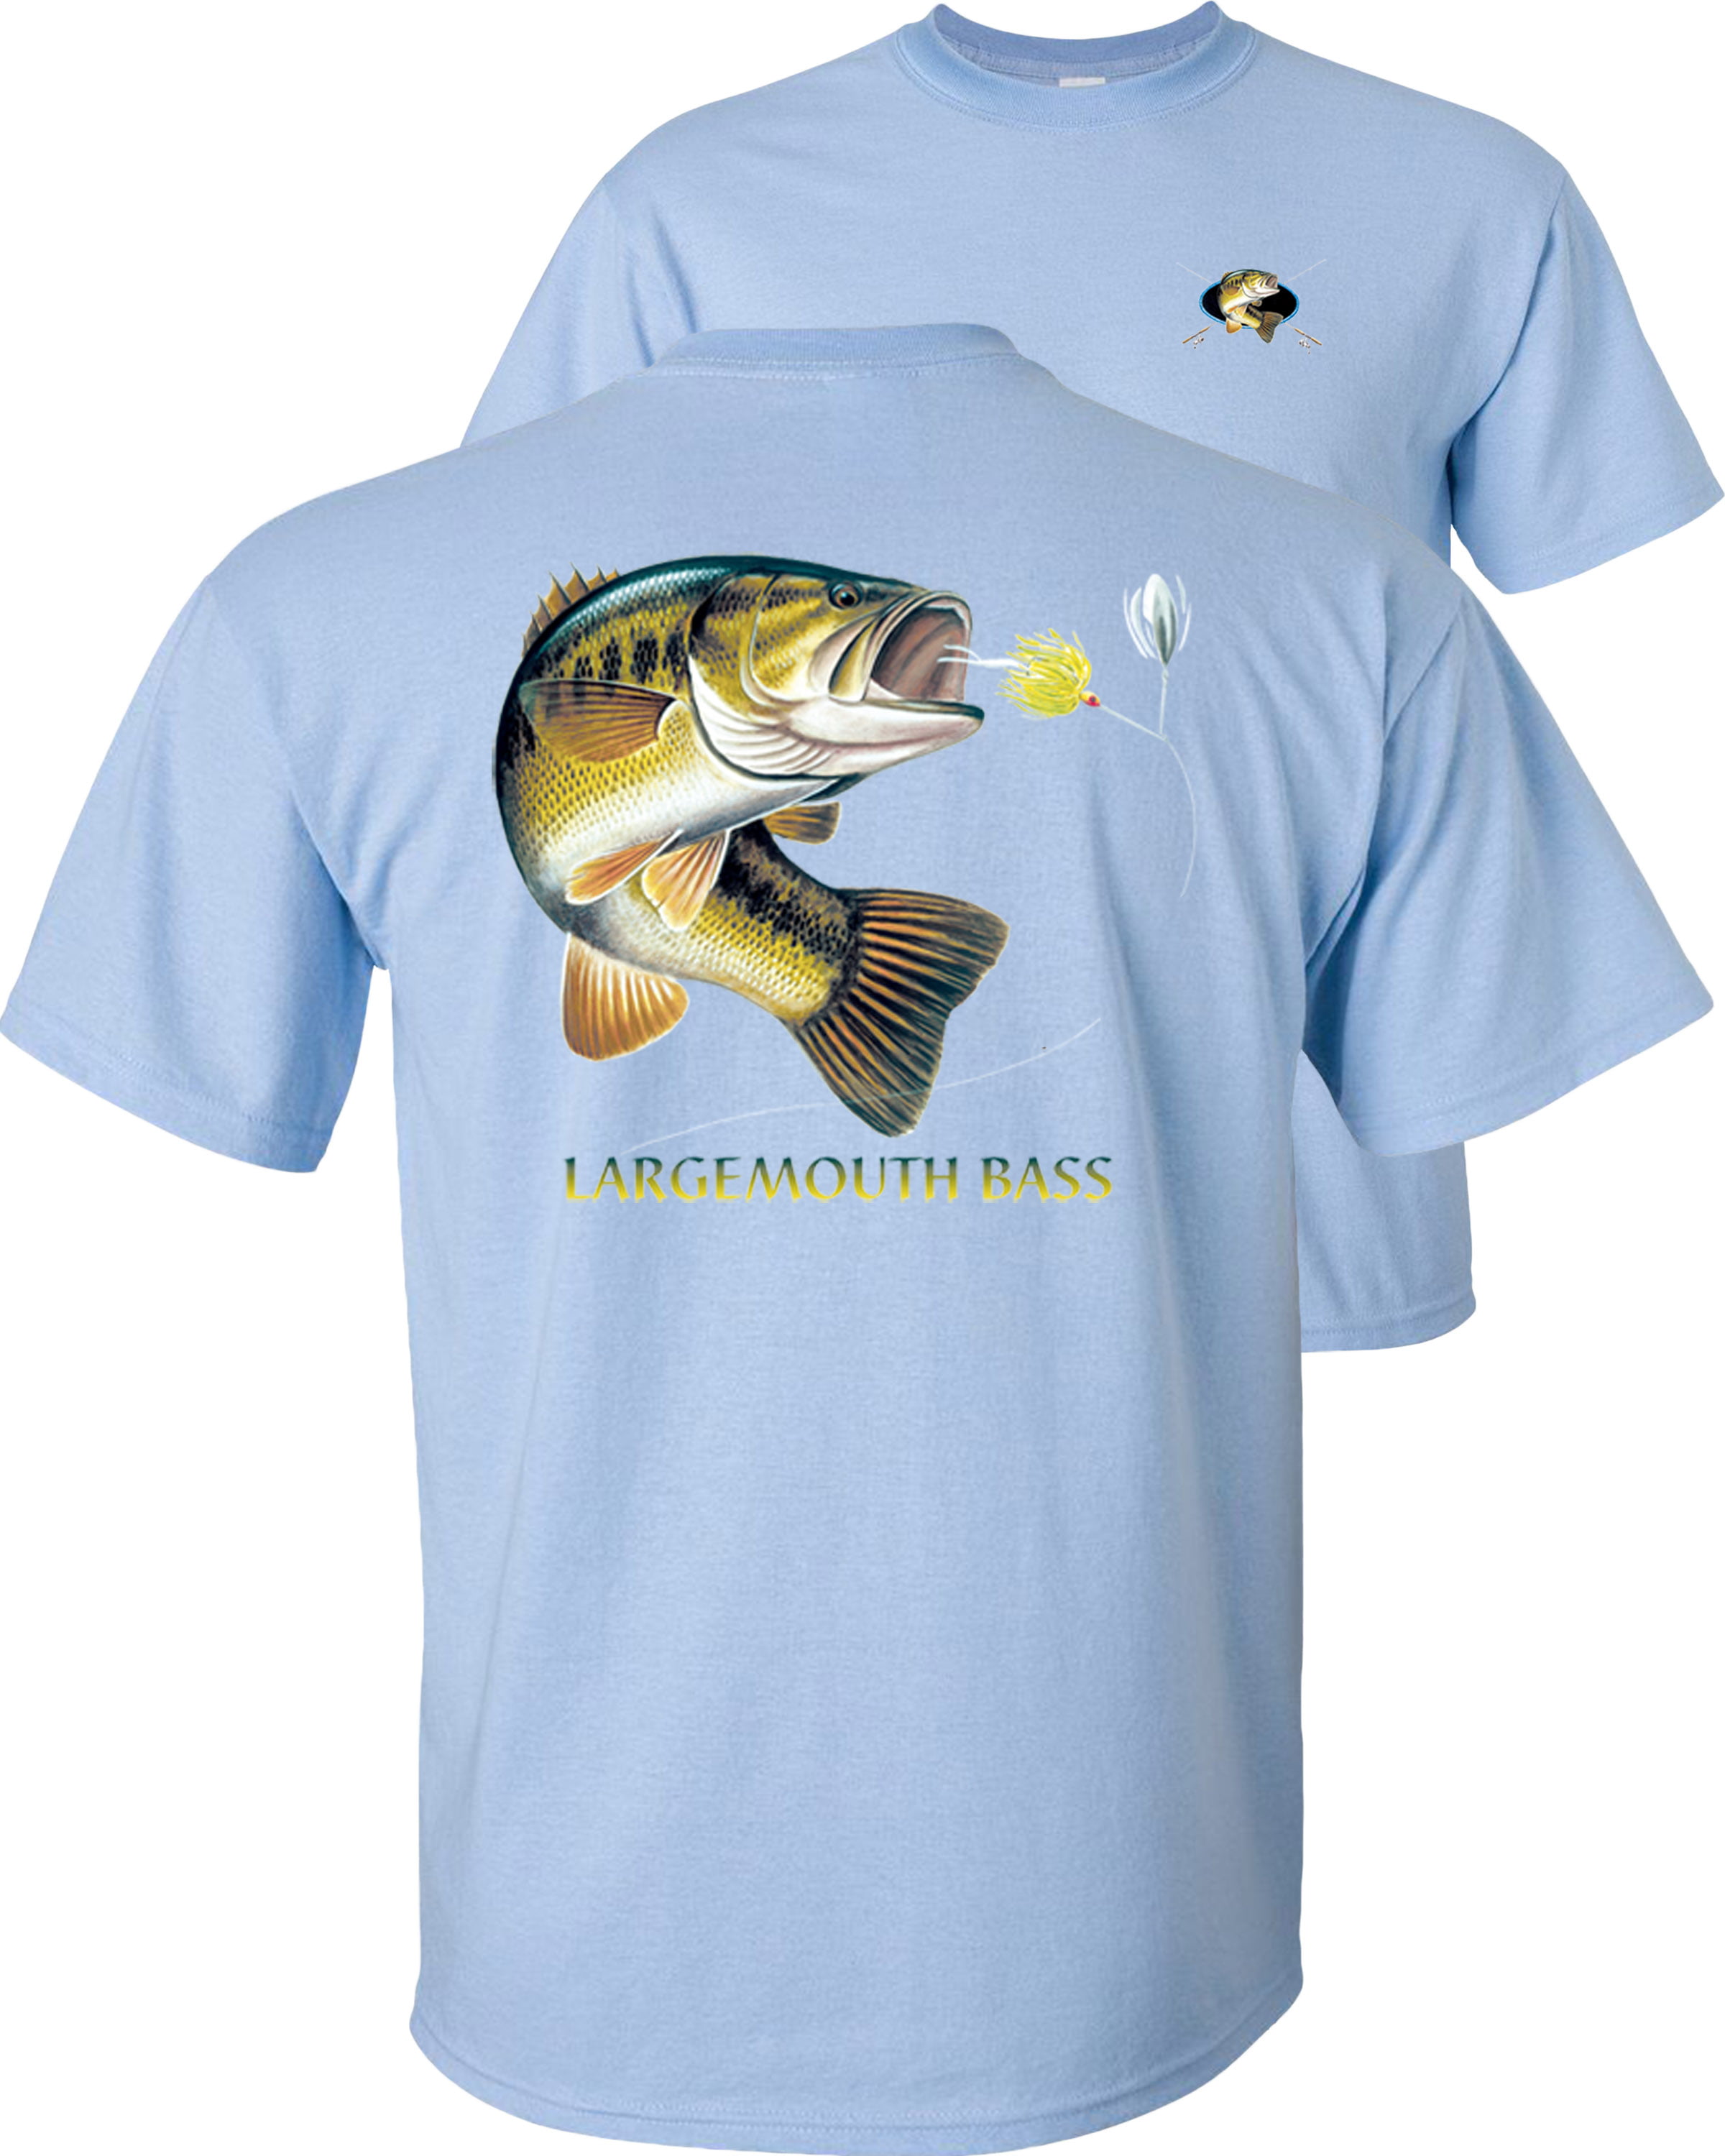 Fair Game Largemouth Bass T-Shirt, combination profile, Fishing Graphic Tee-Sand-L  